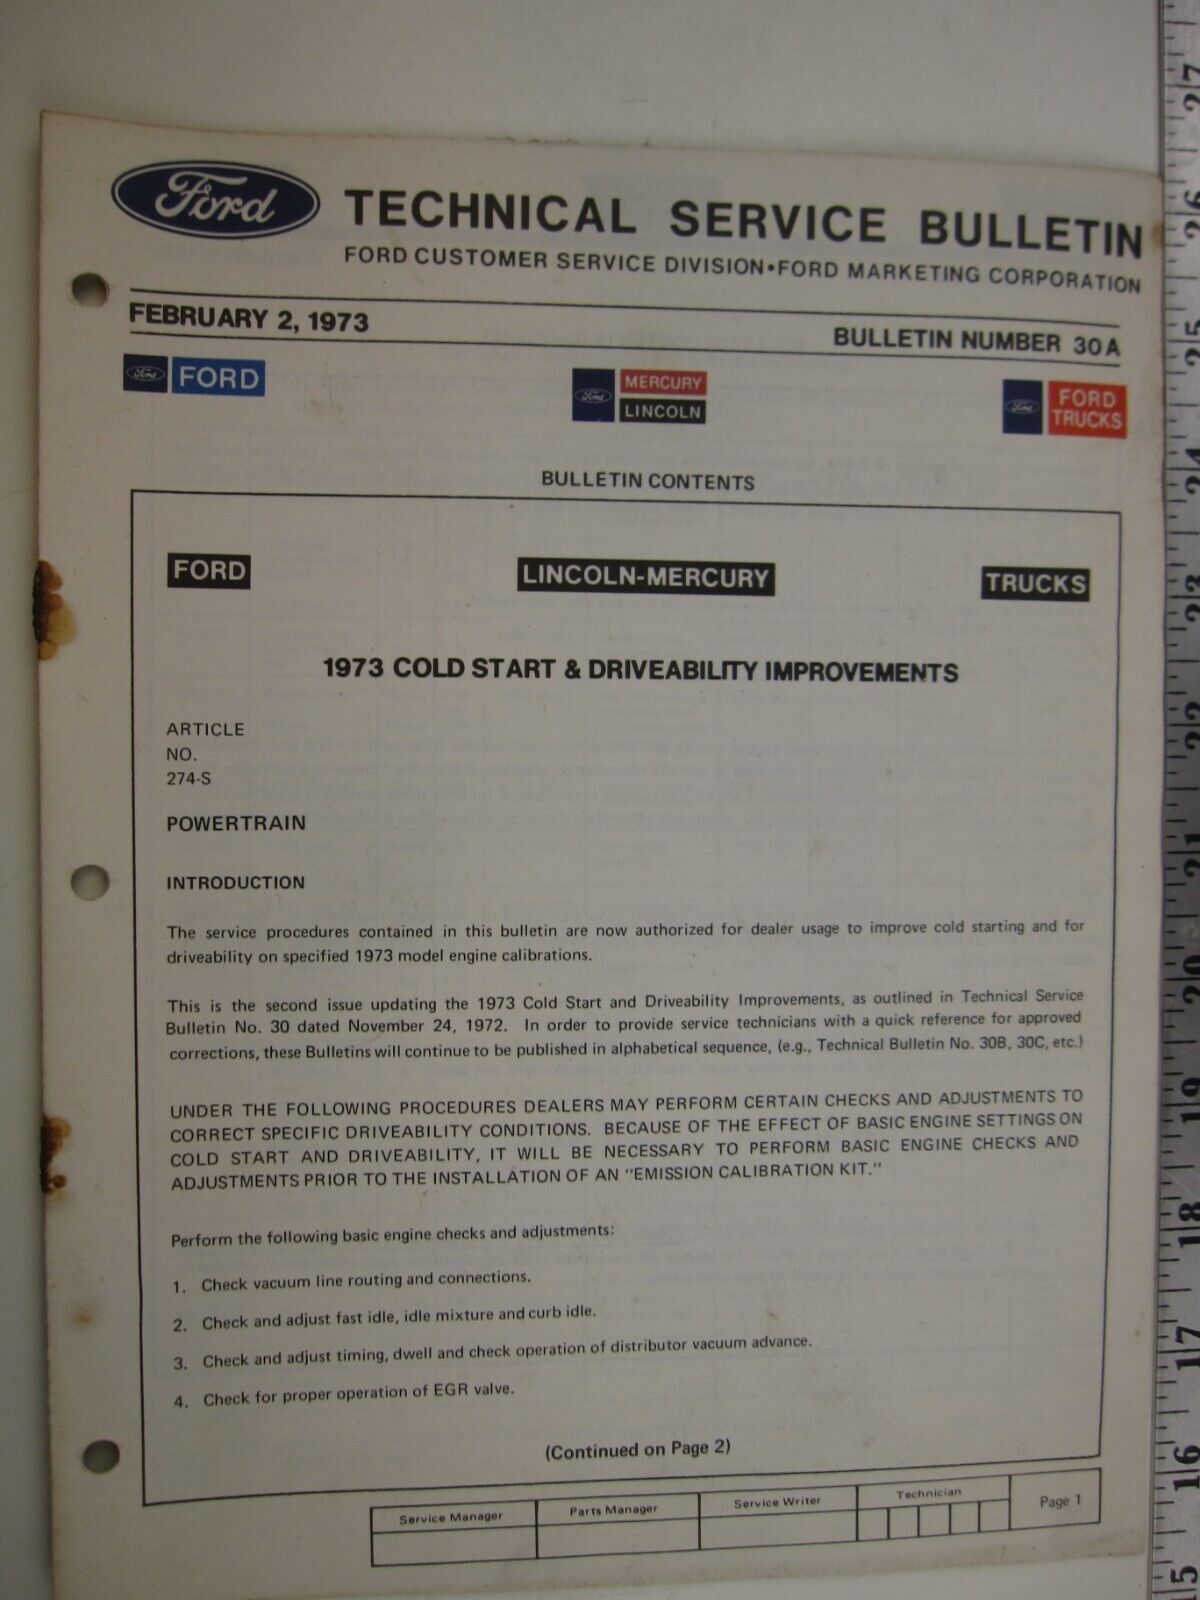 February 2, 1973 FORD Technical Service Bulletin Number 30A   BIS